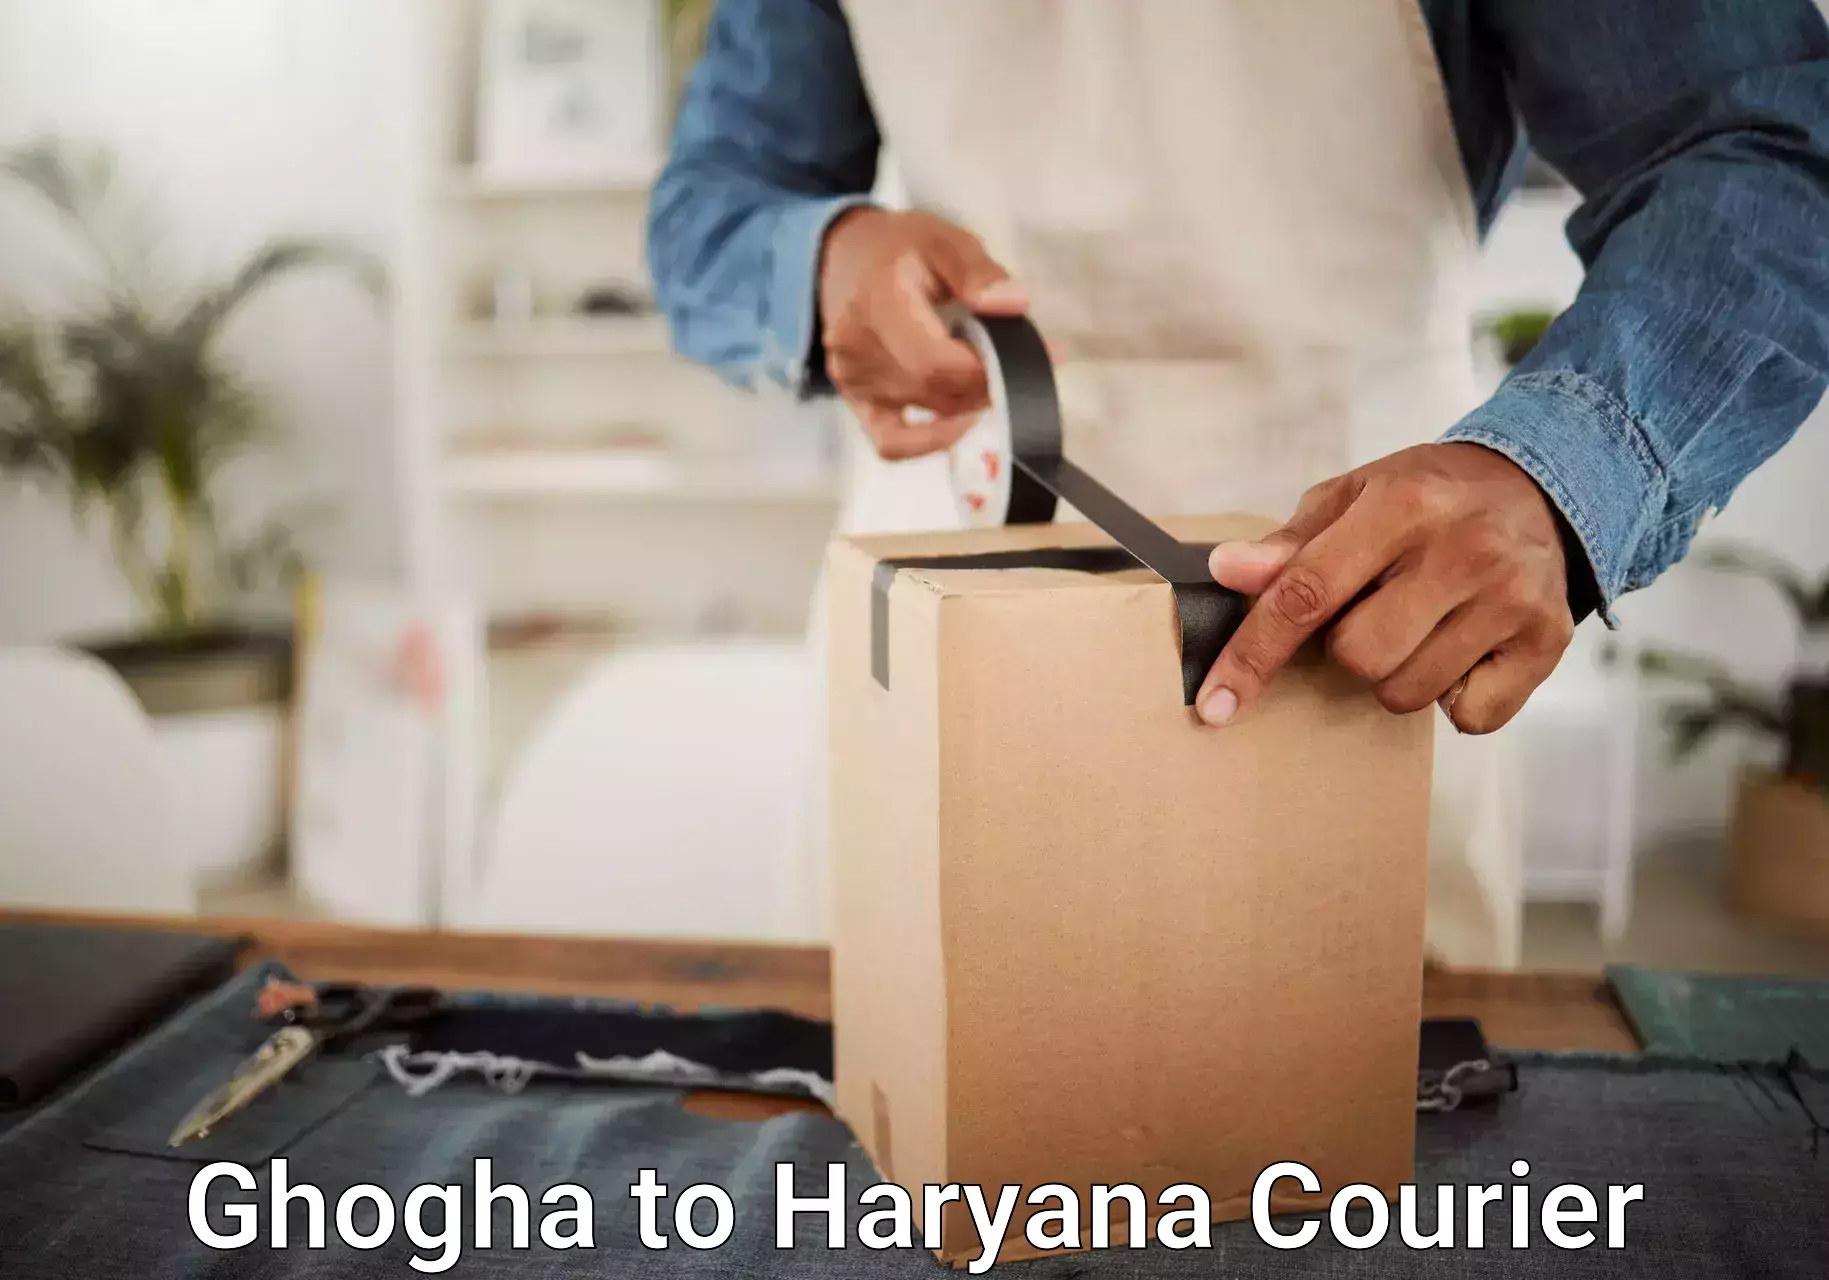 Baggage transport professionals Ghogha to Haryana